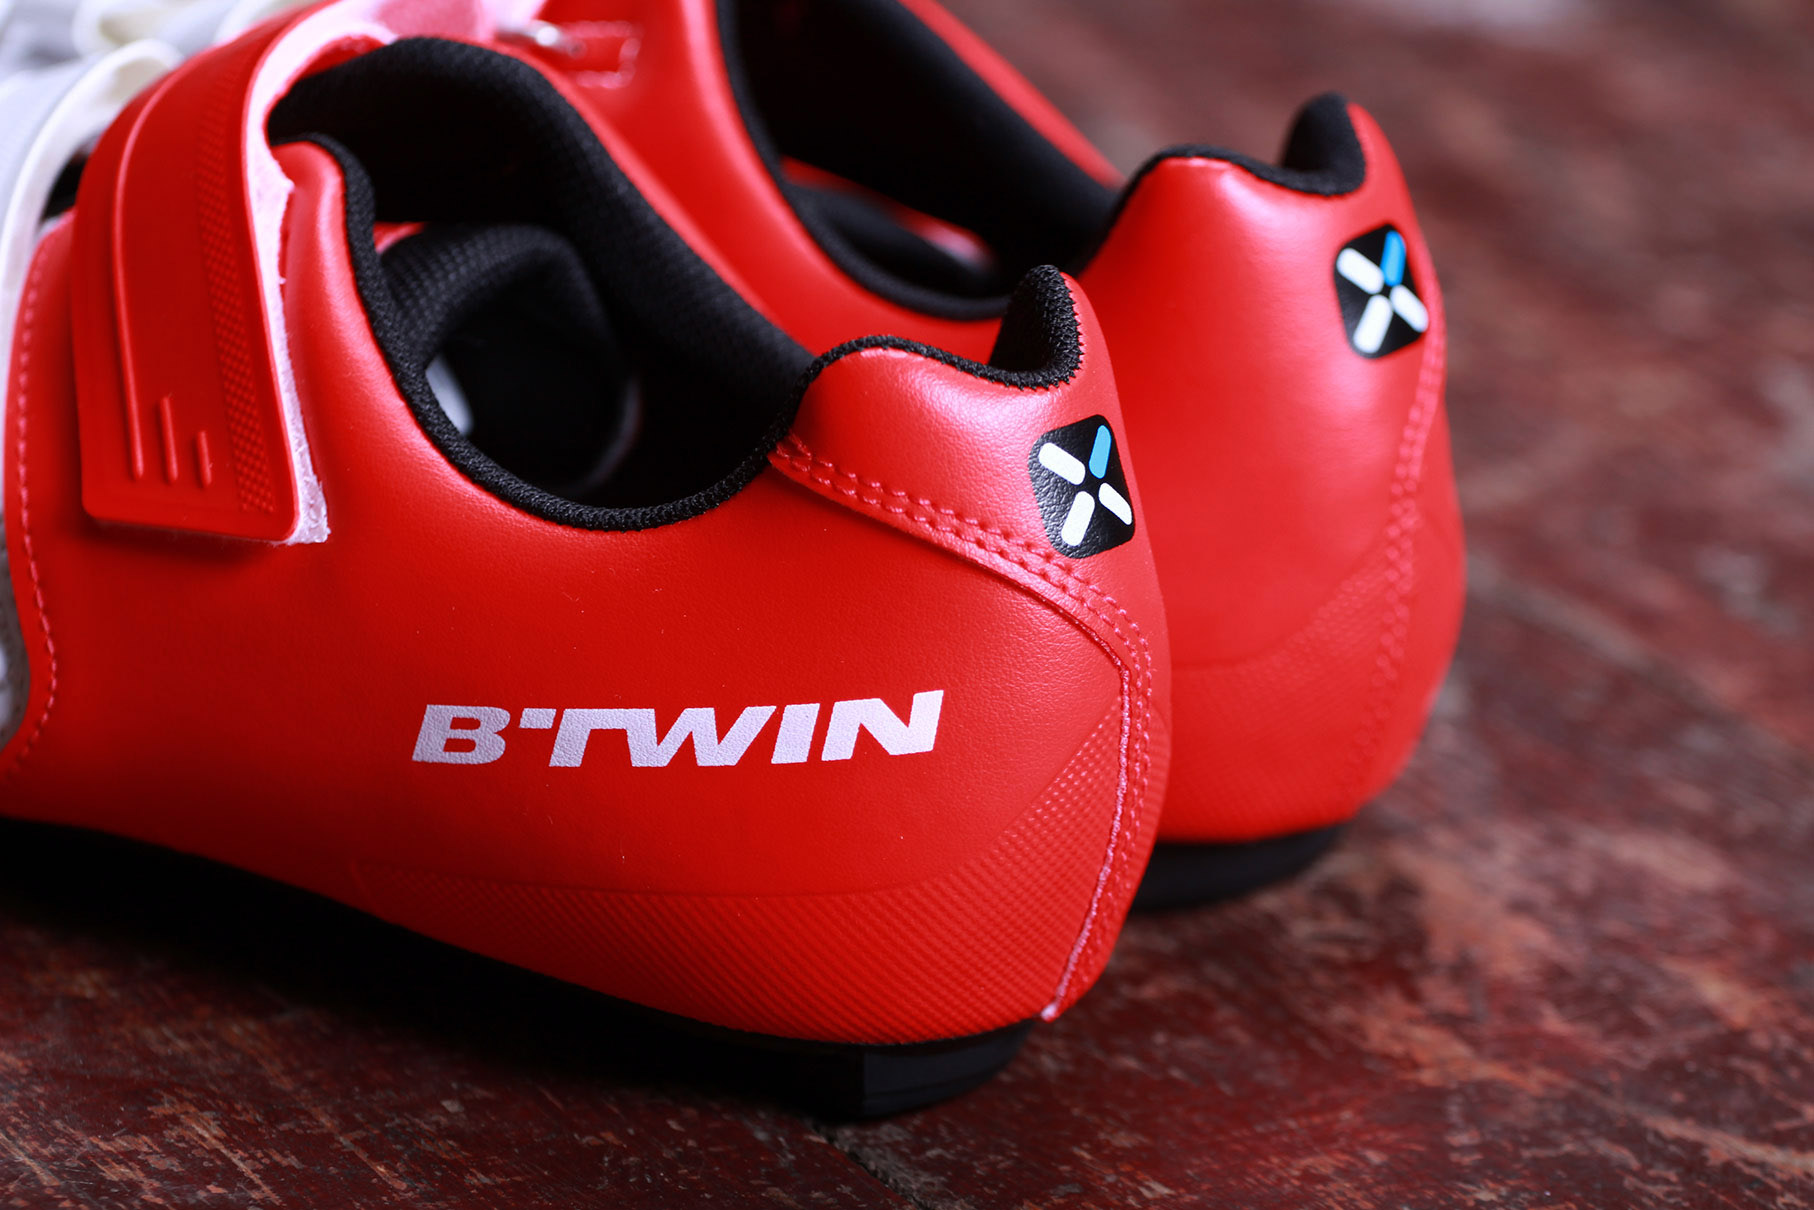 btwin spd shoes